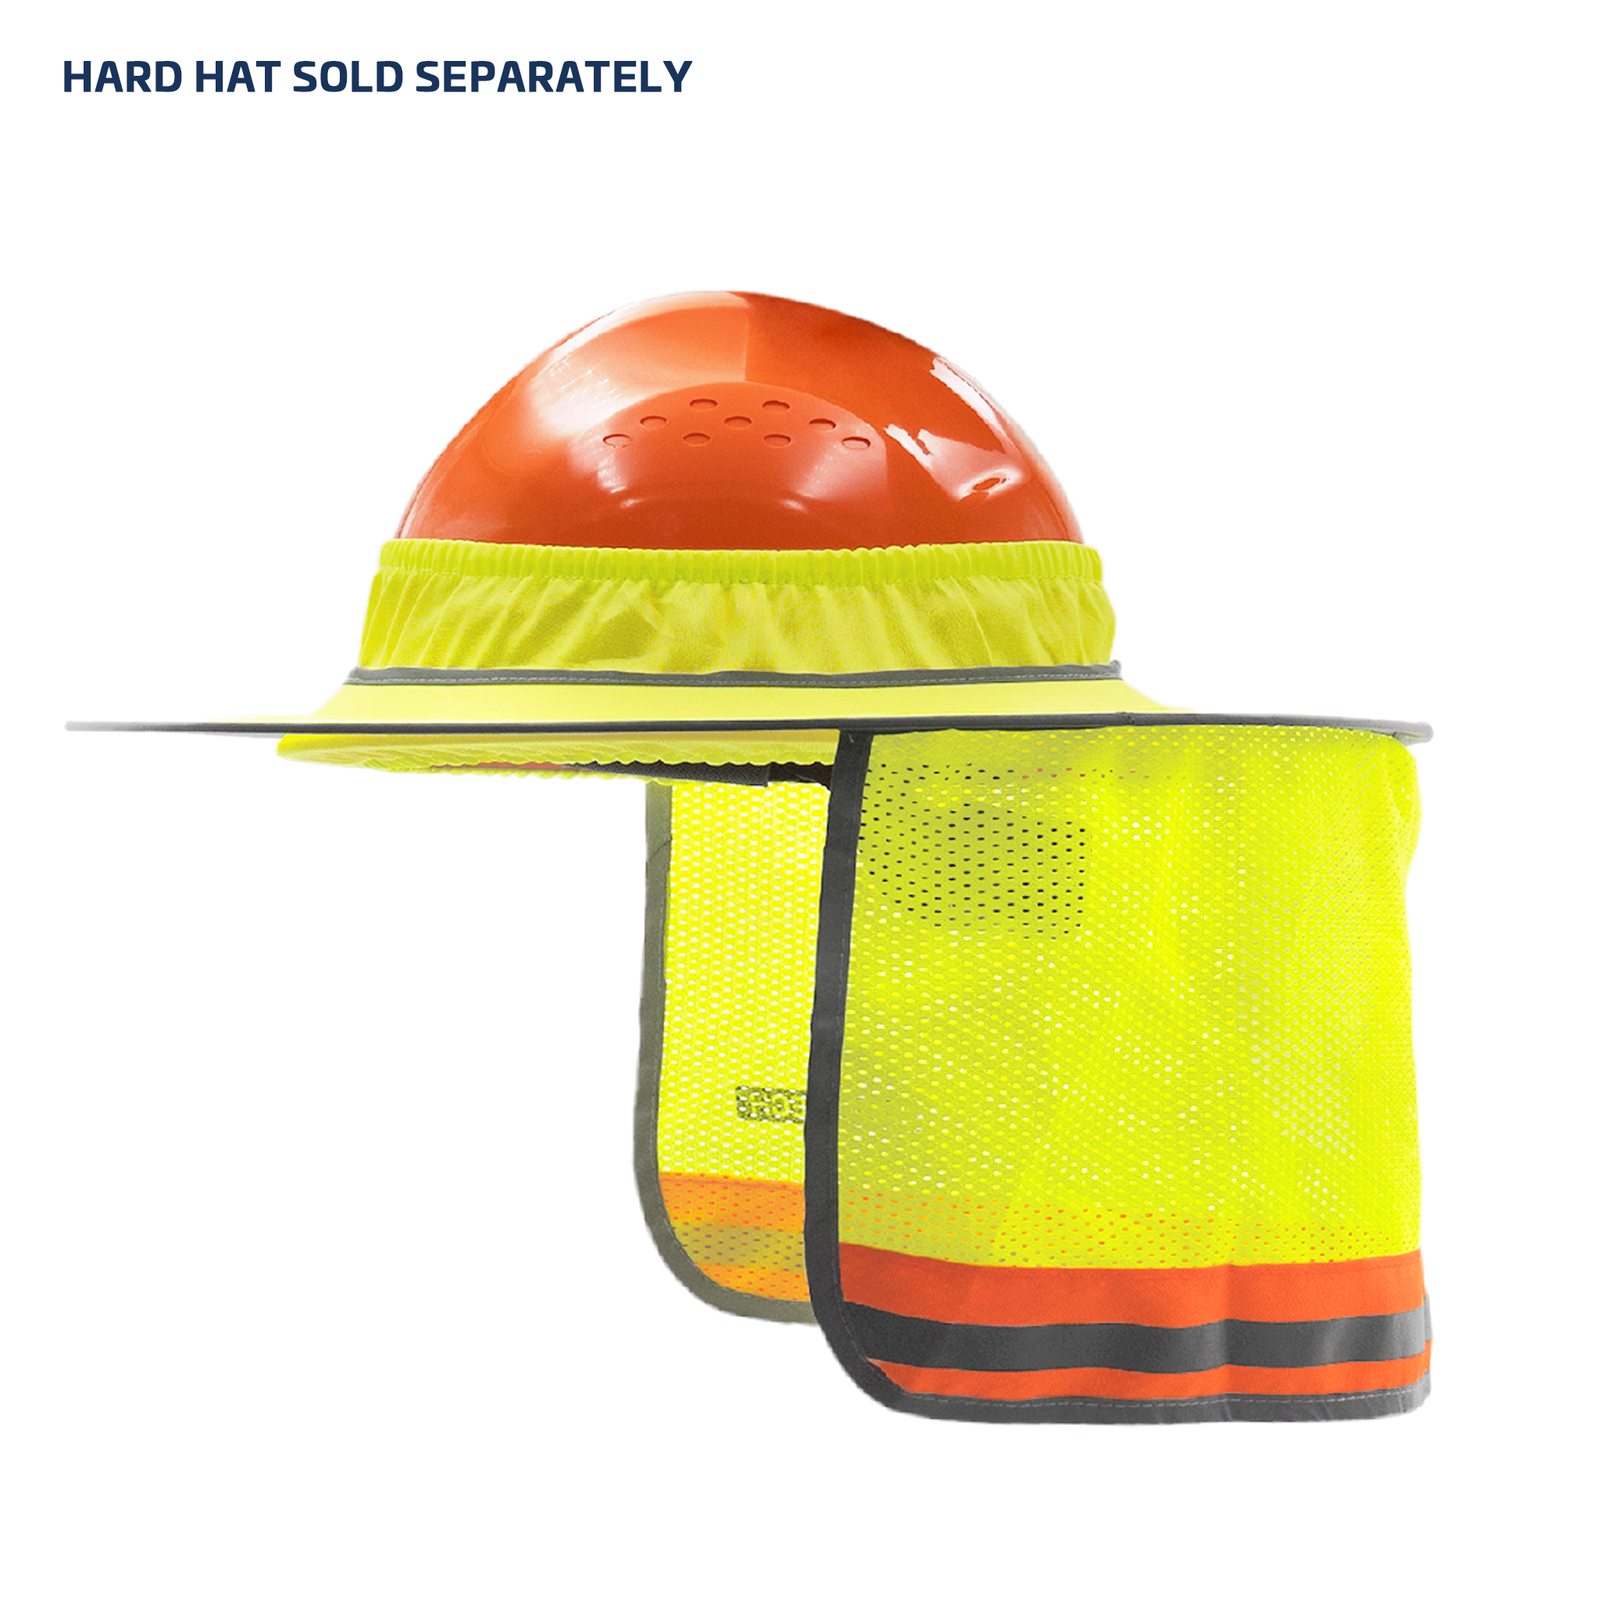 High visibility sun shade and visor for neck shade accessory for hard hats with full brim. Text reads hard hat sold separately. 